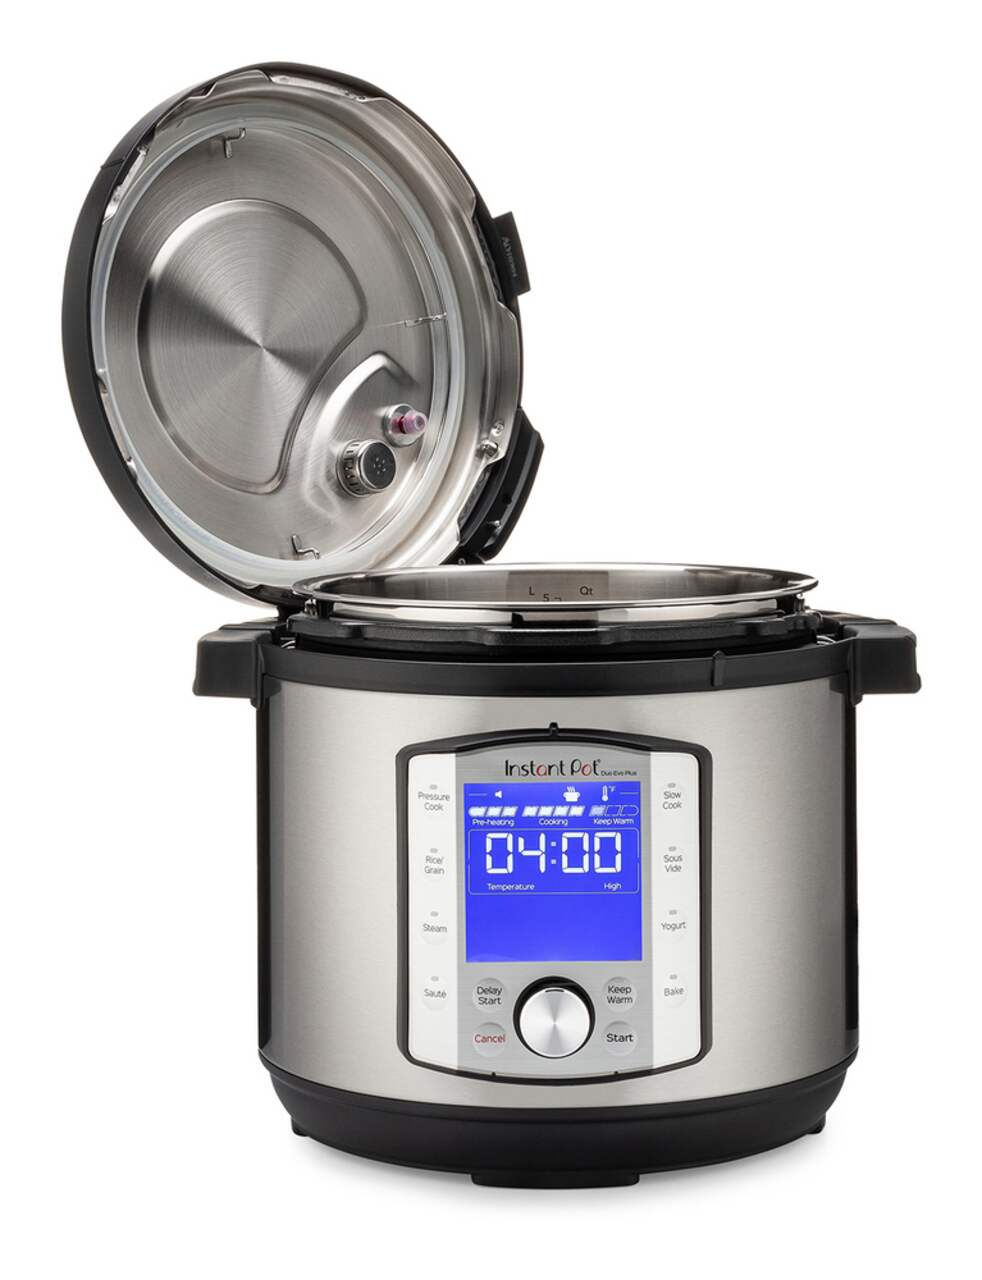 https://media-www.canadiantire.ca/product/living/kitchen/kitchen-appliances/0432705/instant-pot-duo-evo-plus-6qt-b68fc562-d320-4346-9e01-51a08a33d1cf.png?imdensity=1&imwidth=1244&impolicy=mZoom